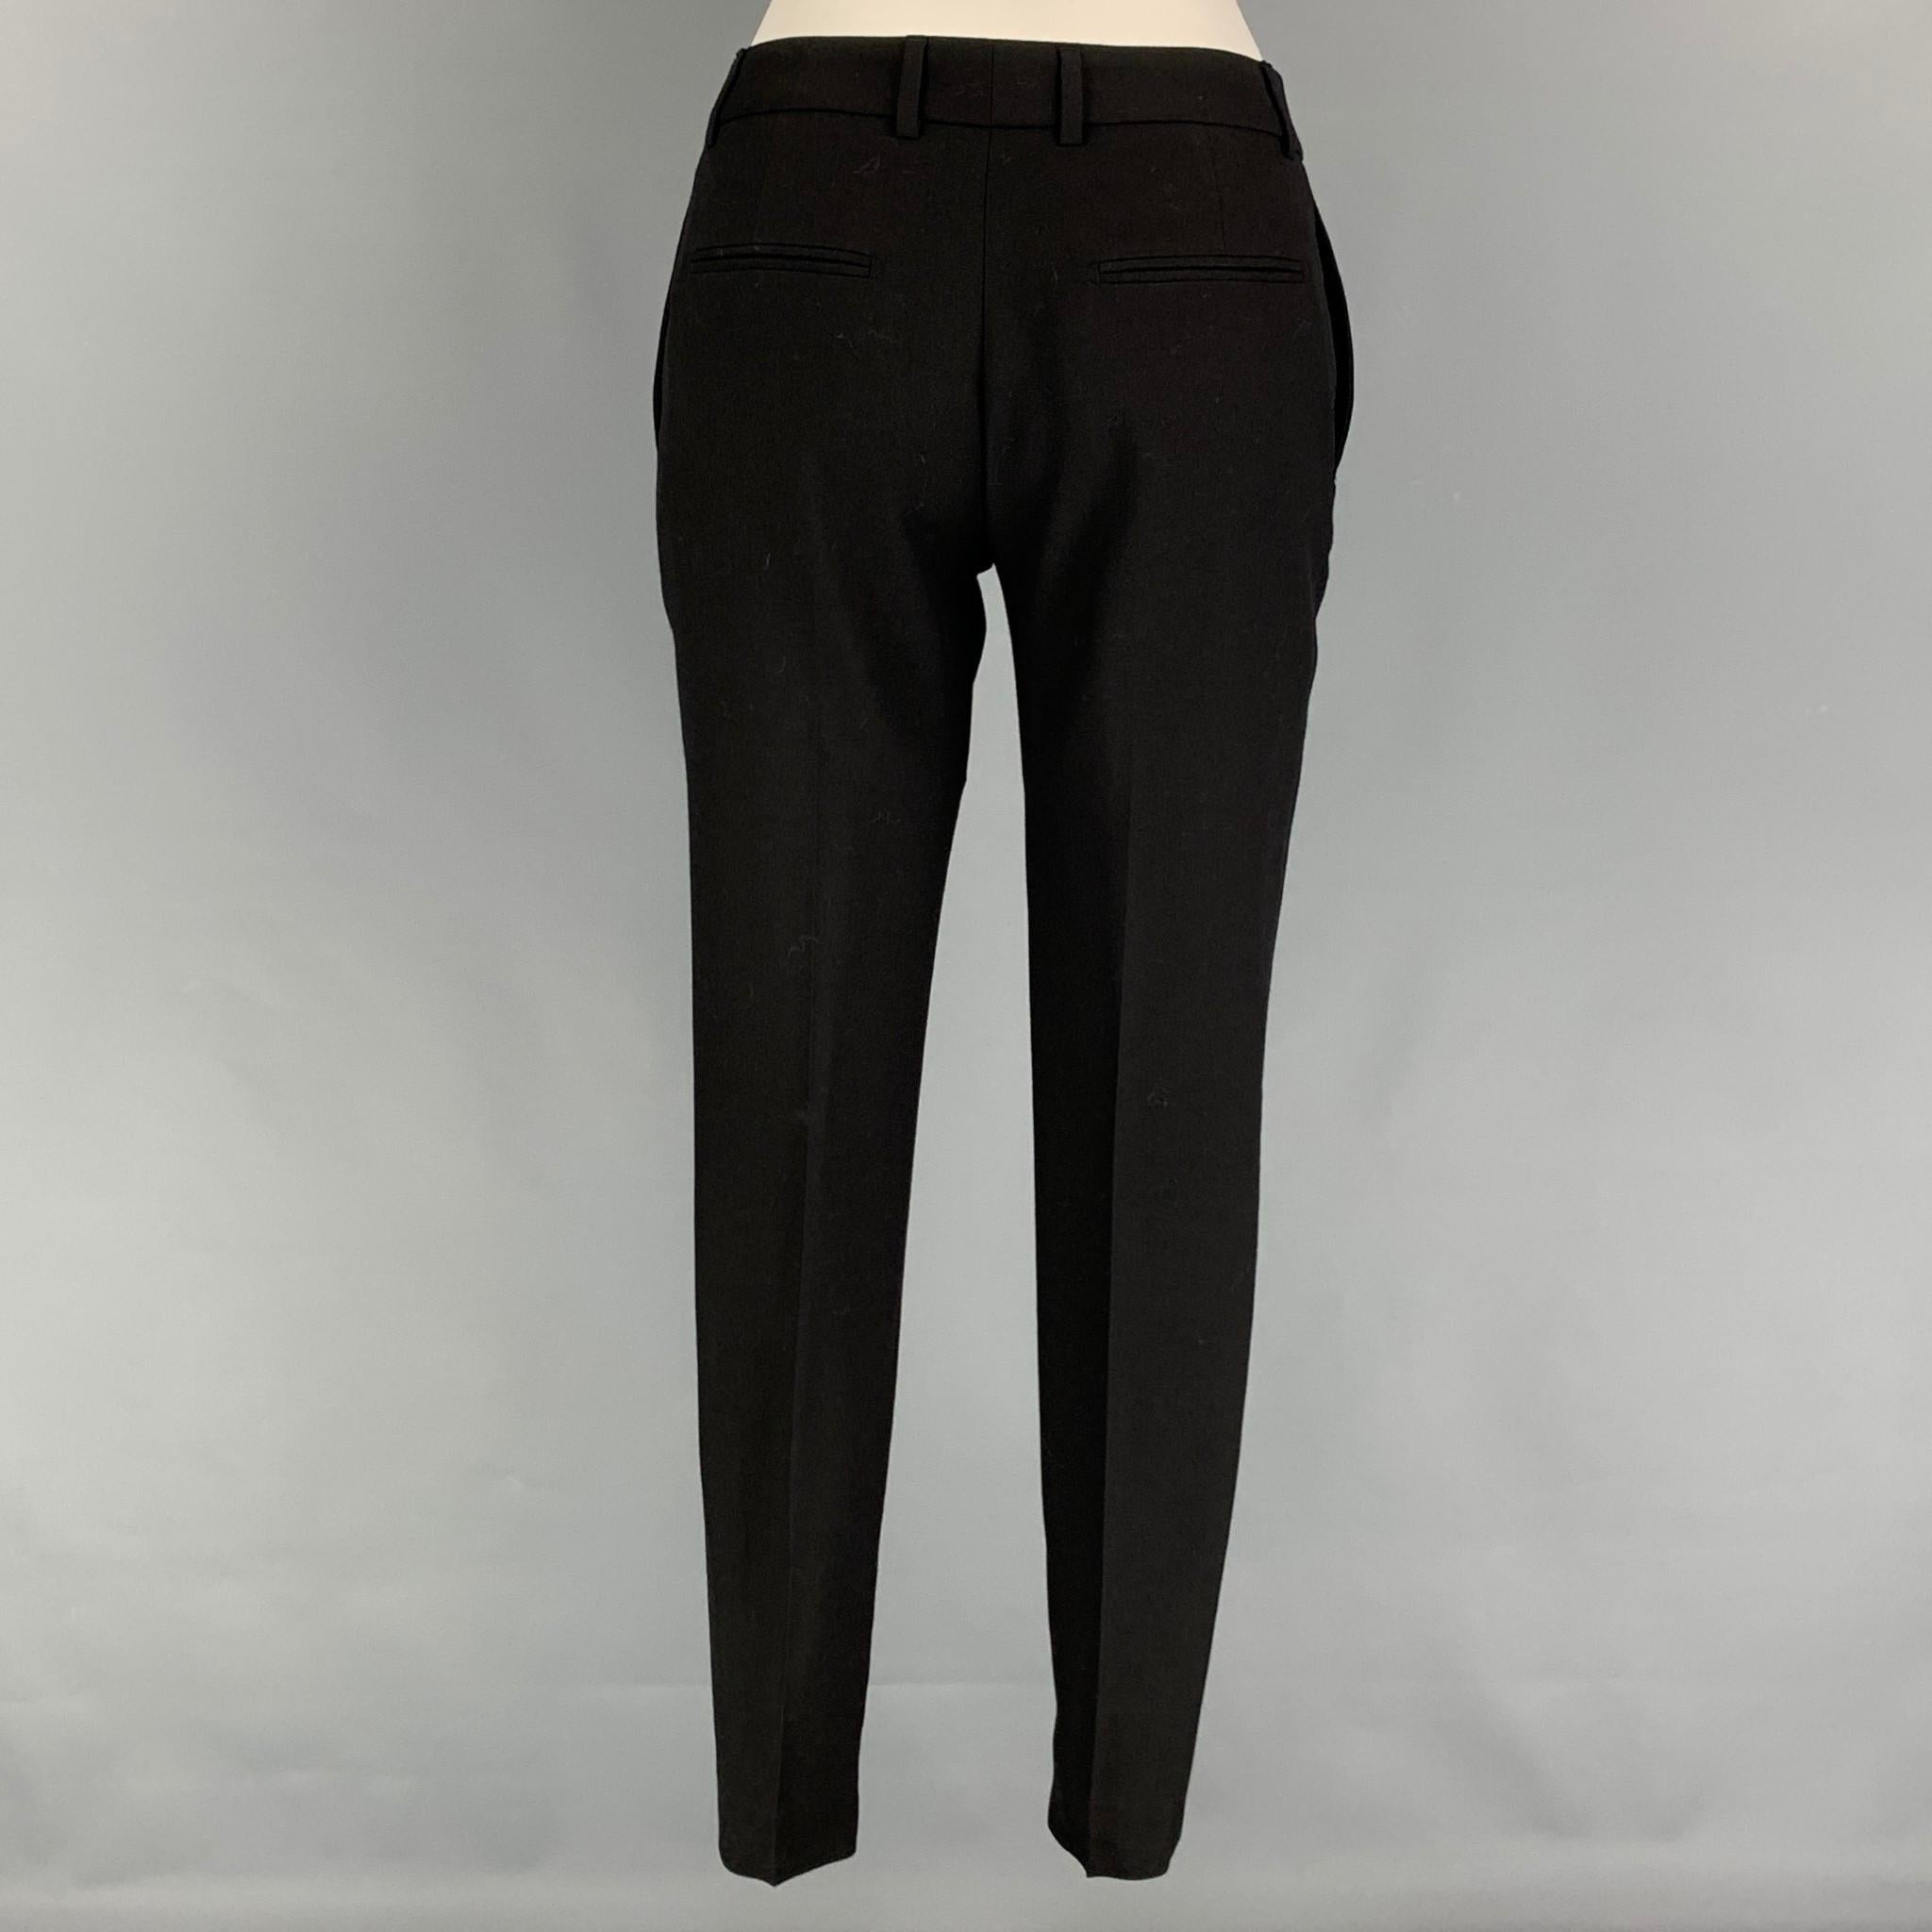 SAINT LAURENT dress pants comes in a black virgin wool featuring a skinny fit, flat front, zipped legs, front tab, and a zip fly closure. Made in Italy. 

Very Good Pre-Owned Condition.
Marked: F 34
Original Retail Price: